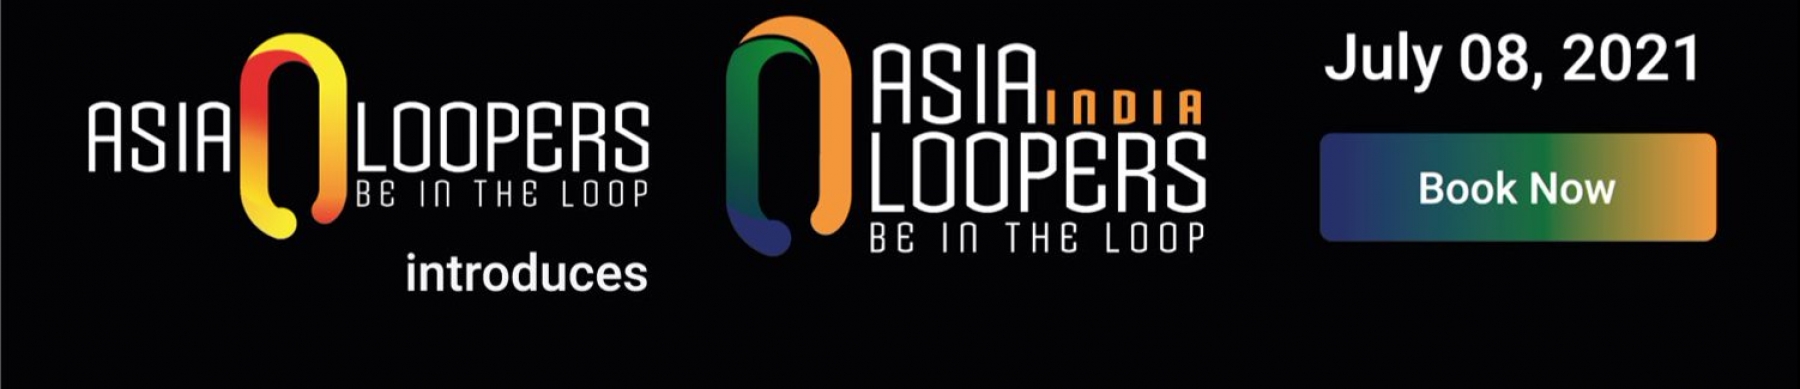 Bannière Asia Loopers